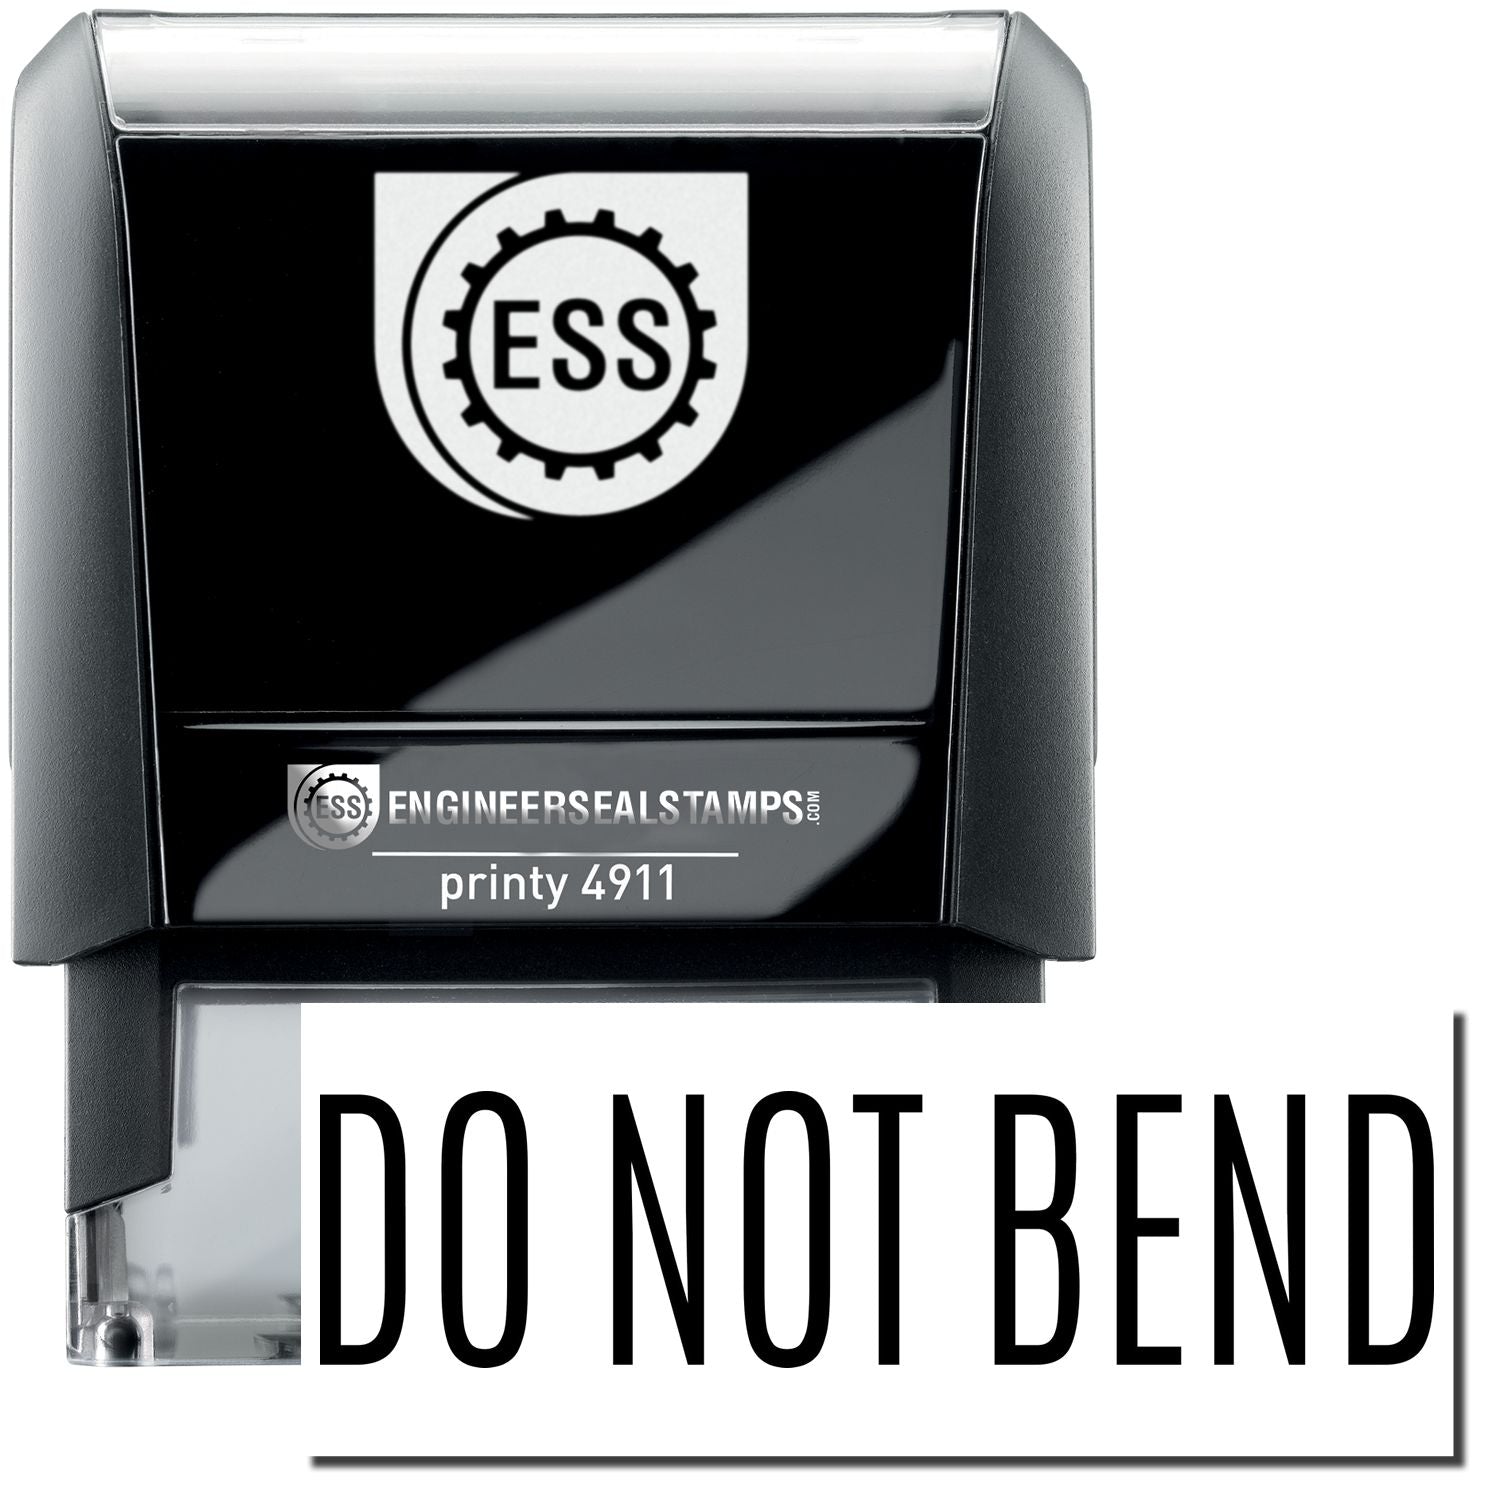 A self-inking stamp with a stamped image showing how the text "DO NOT BEND" is displayed after stamping.